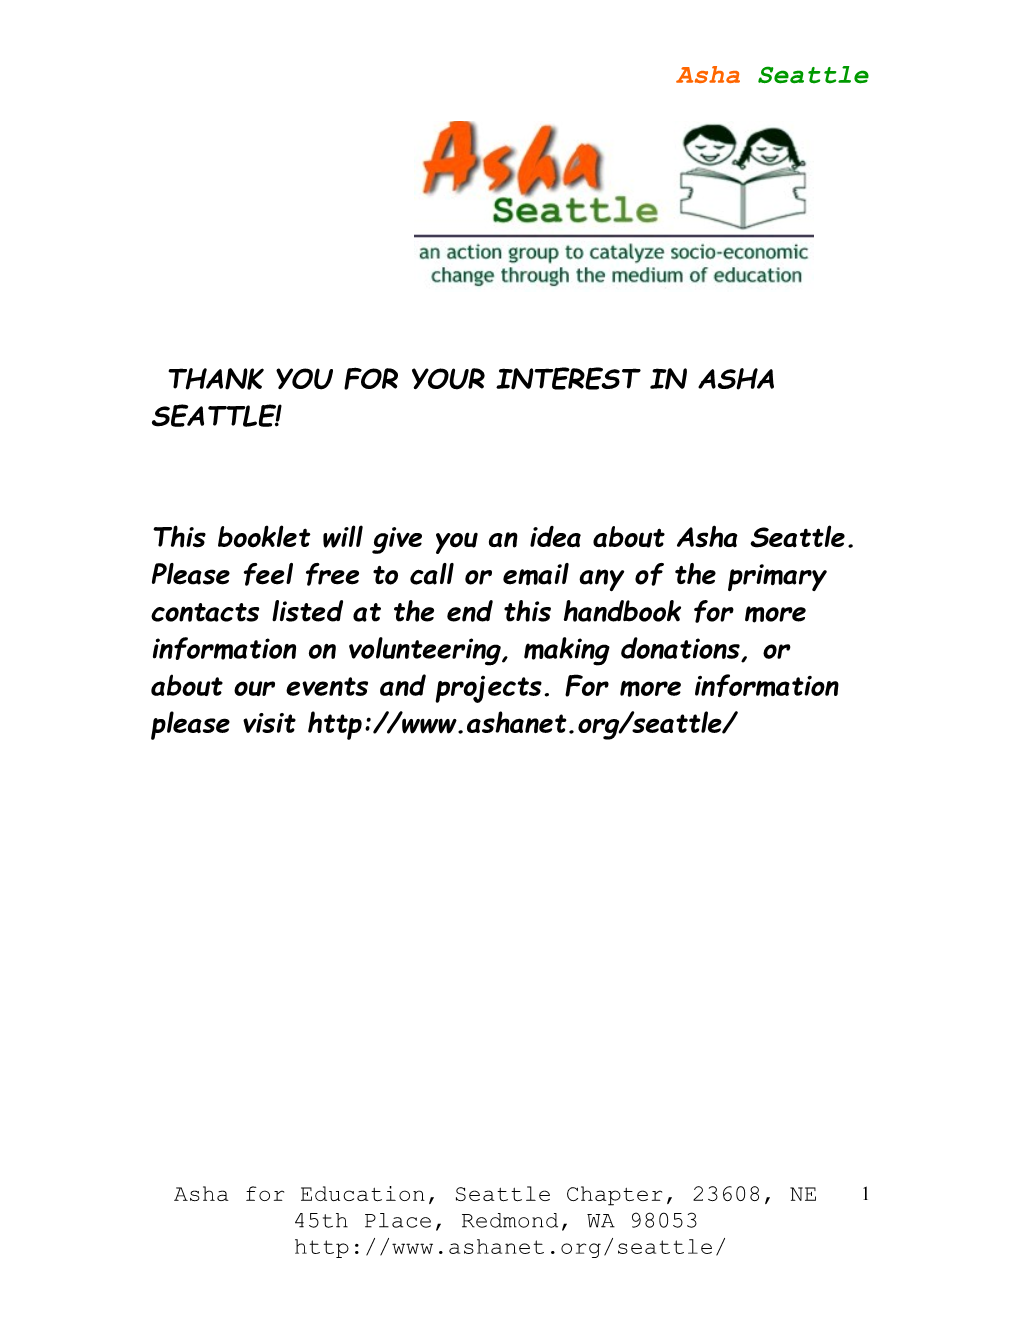 Asha-Seattle Is a Chapter of Asha for Education, a Non-Profit Voluntary Organization Dedicated